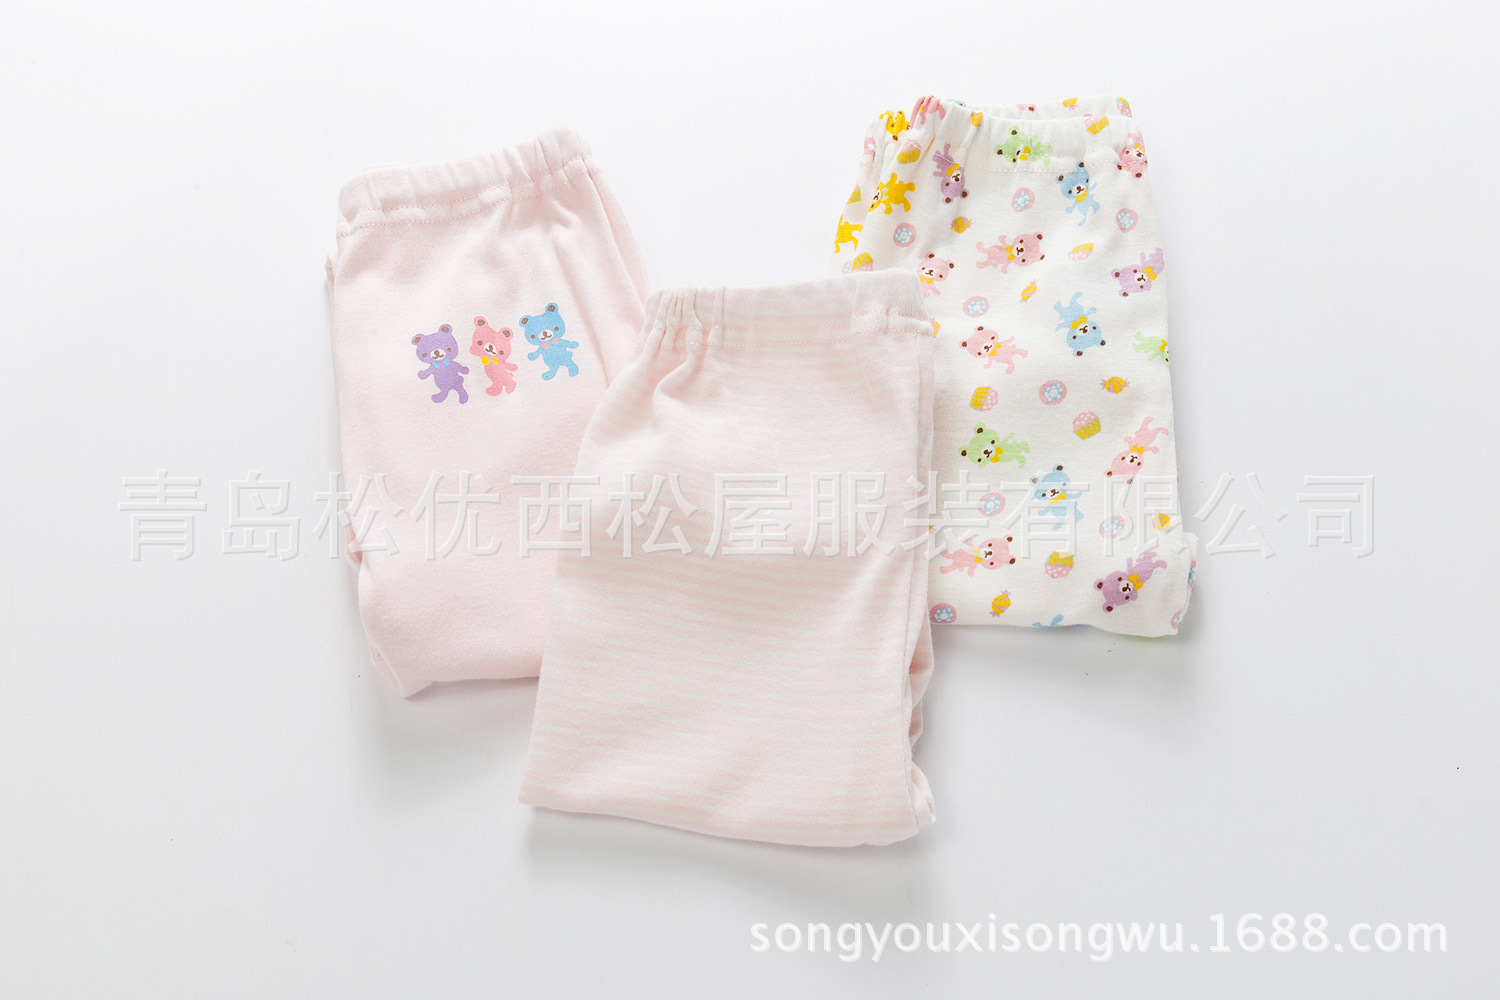 Boys and girls trousers in different colors and high quality